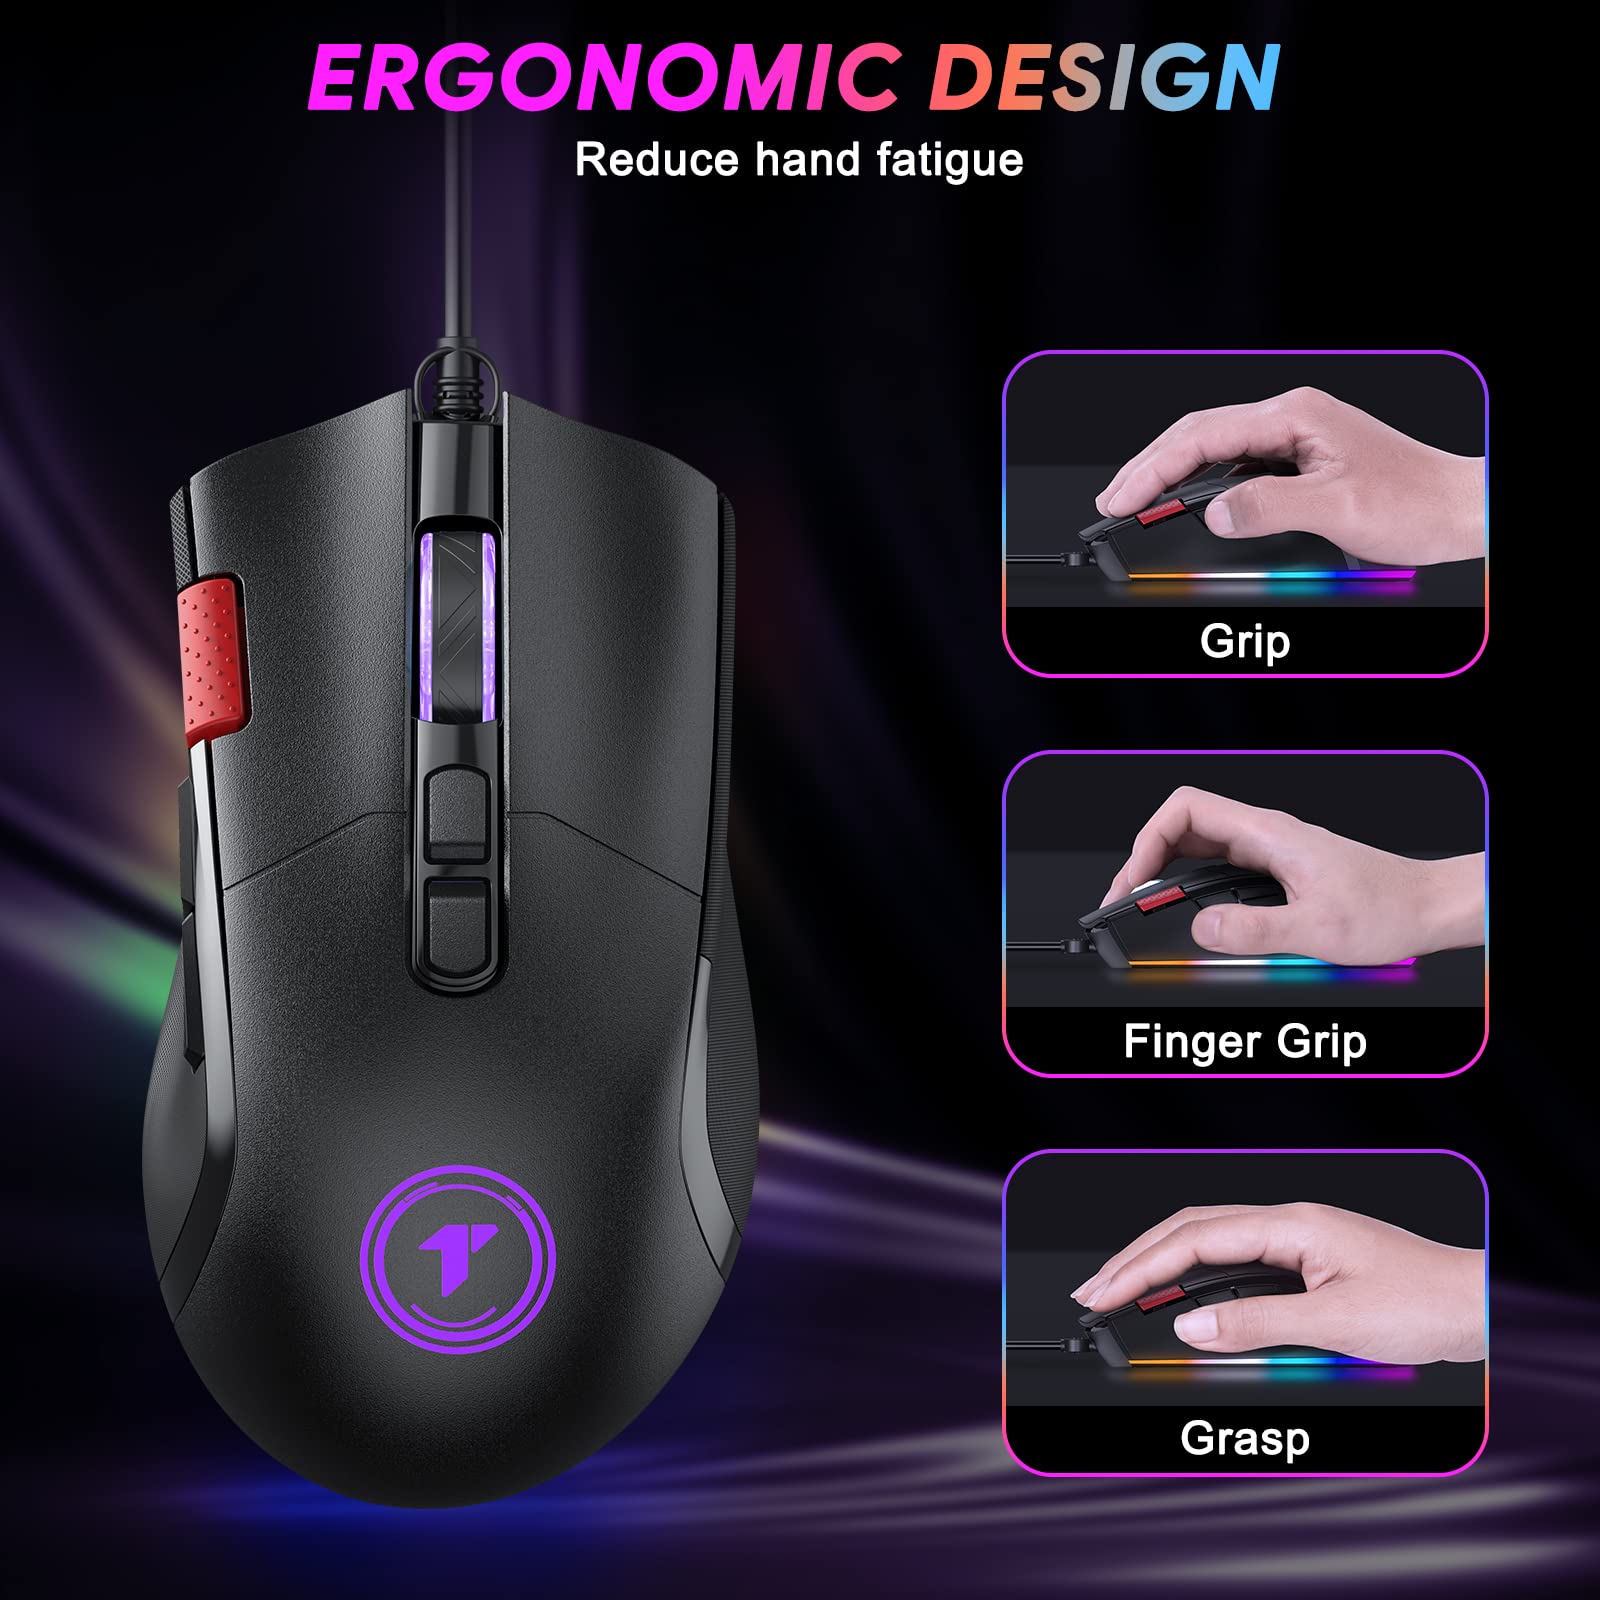 TECURS Wired Gaming Mouse, RGB Backlit Ergonomic Mouse with 8 Programmable Buttons up to 7200 DPI for Laptop/Windows PC/Mac, USB Mouse Gamer Mouse Black